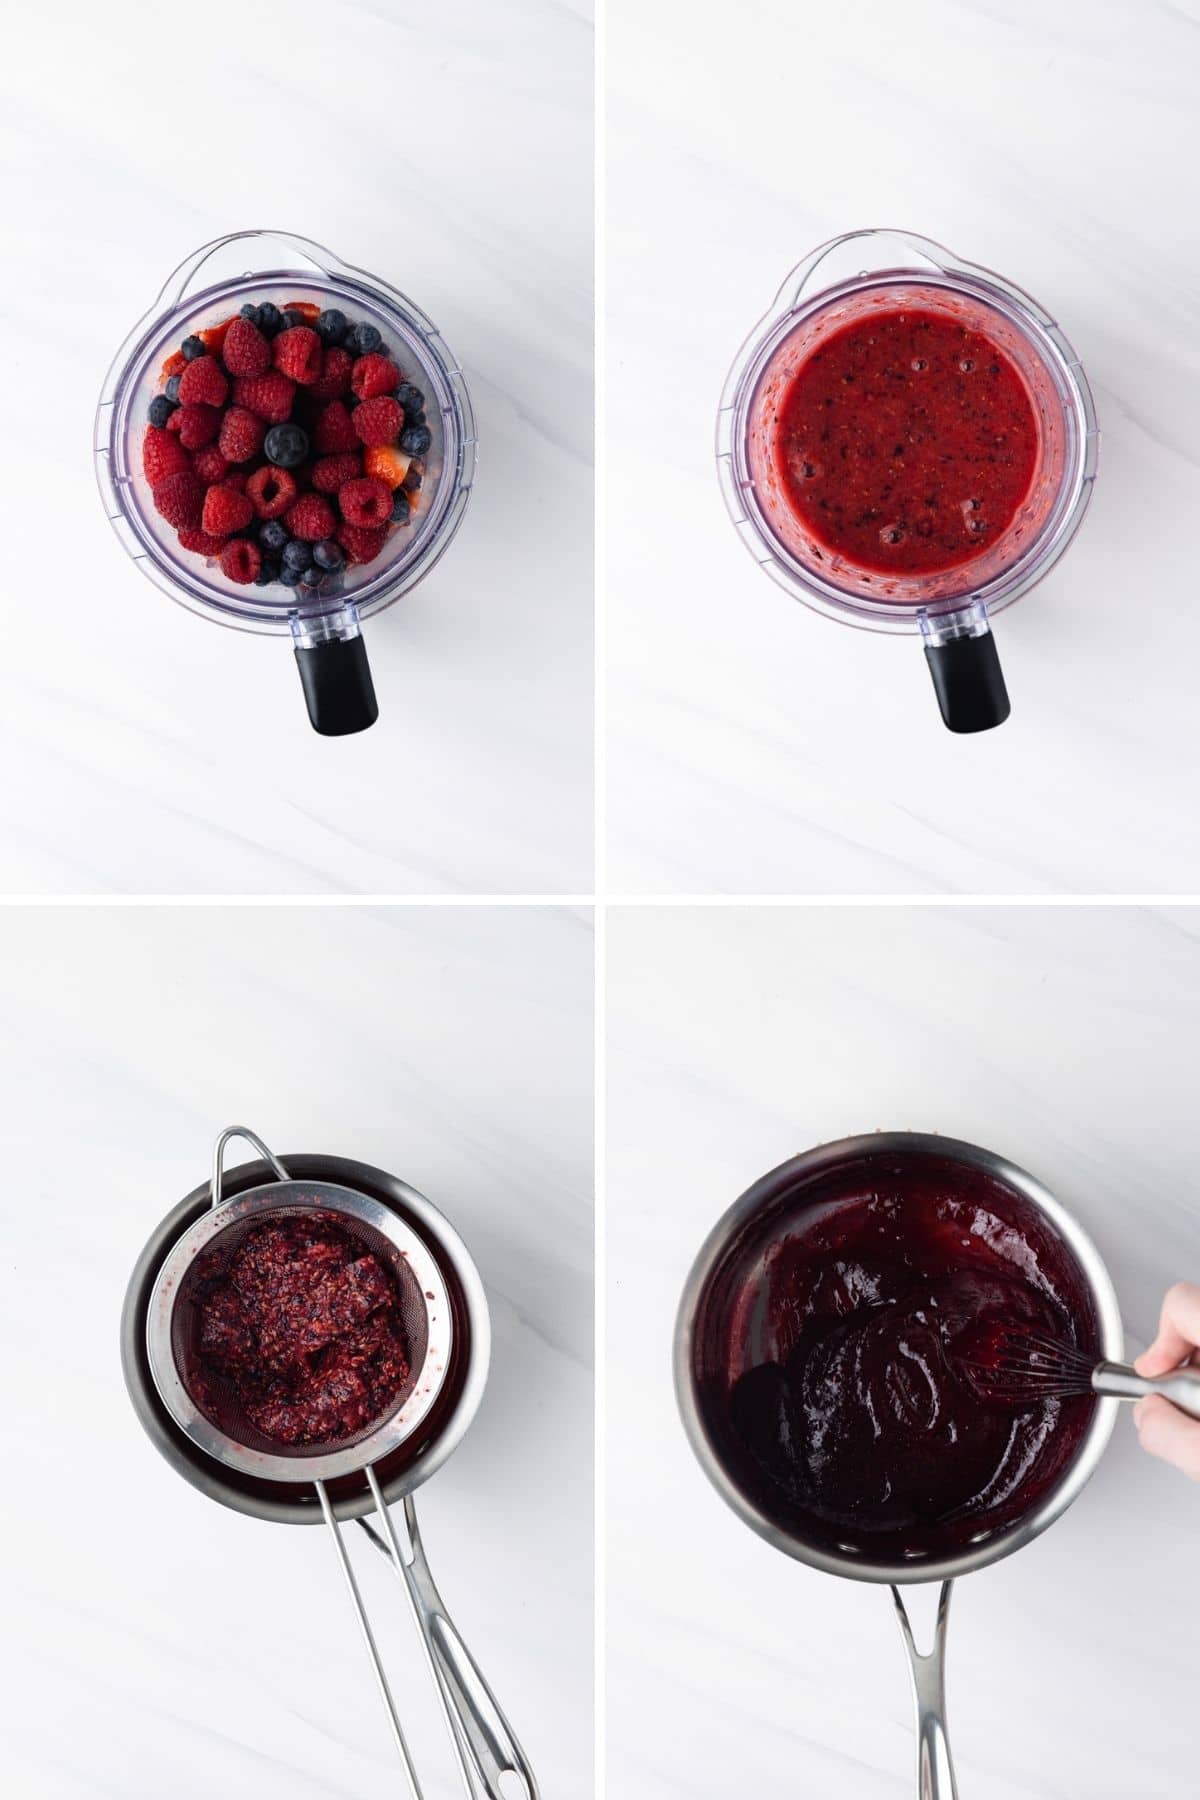 Process shots showing how to make berry jam for cheesecake.